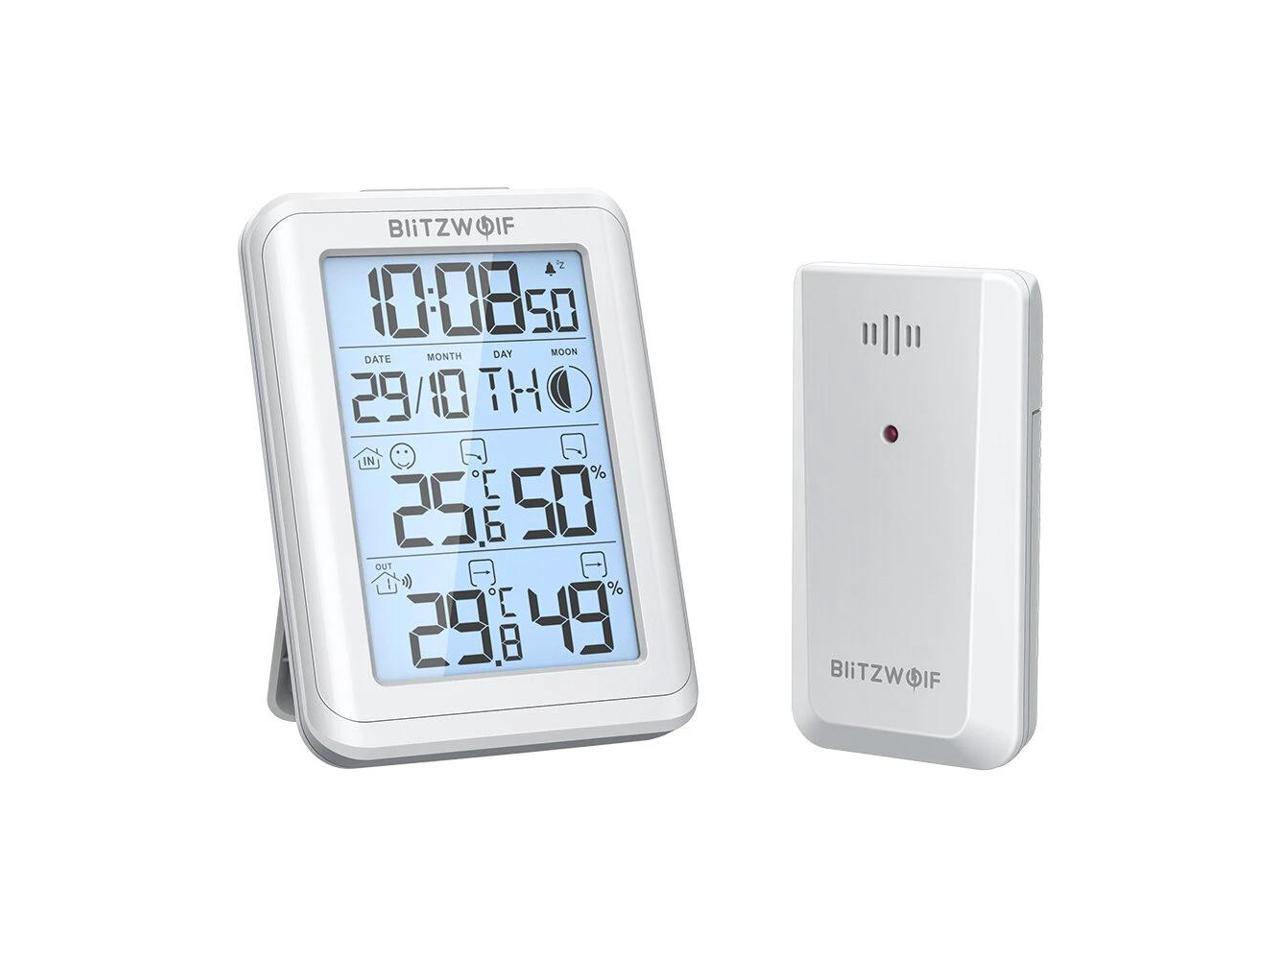 Details about   Desk Digital Alarm Clock Weather Thermometer LED Temperature Humidity Monitor US 